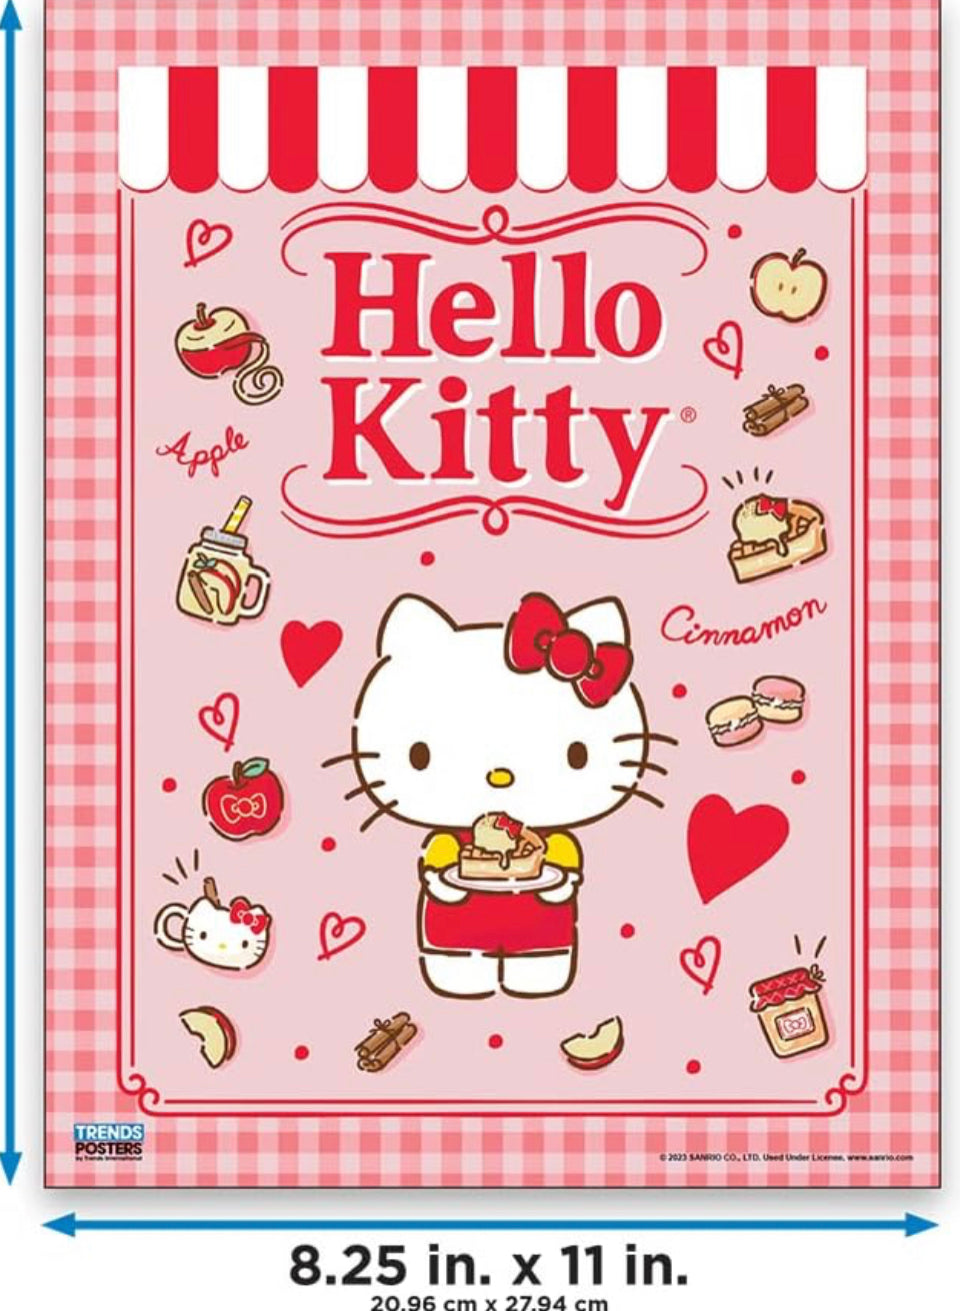 HELLO KITTY AND FRIENDS 12 posters